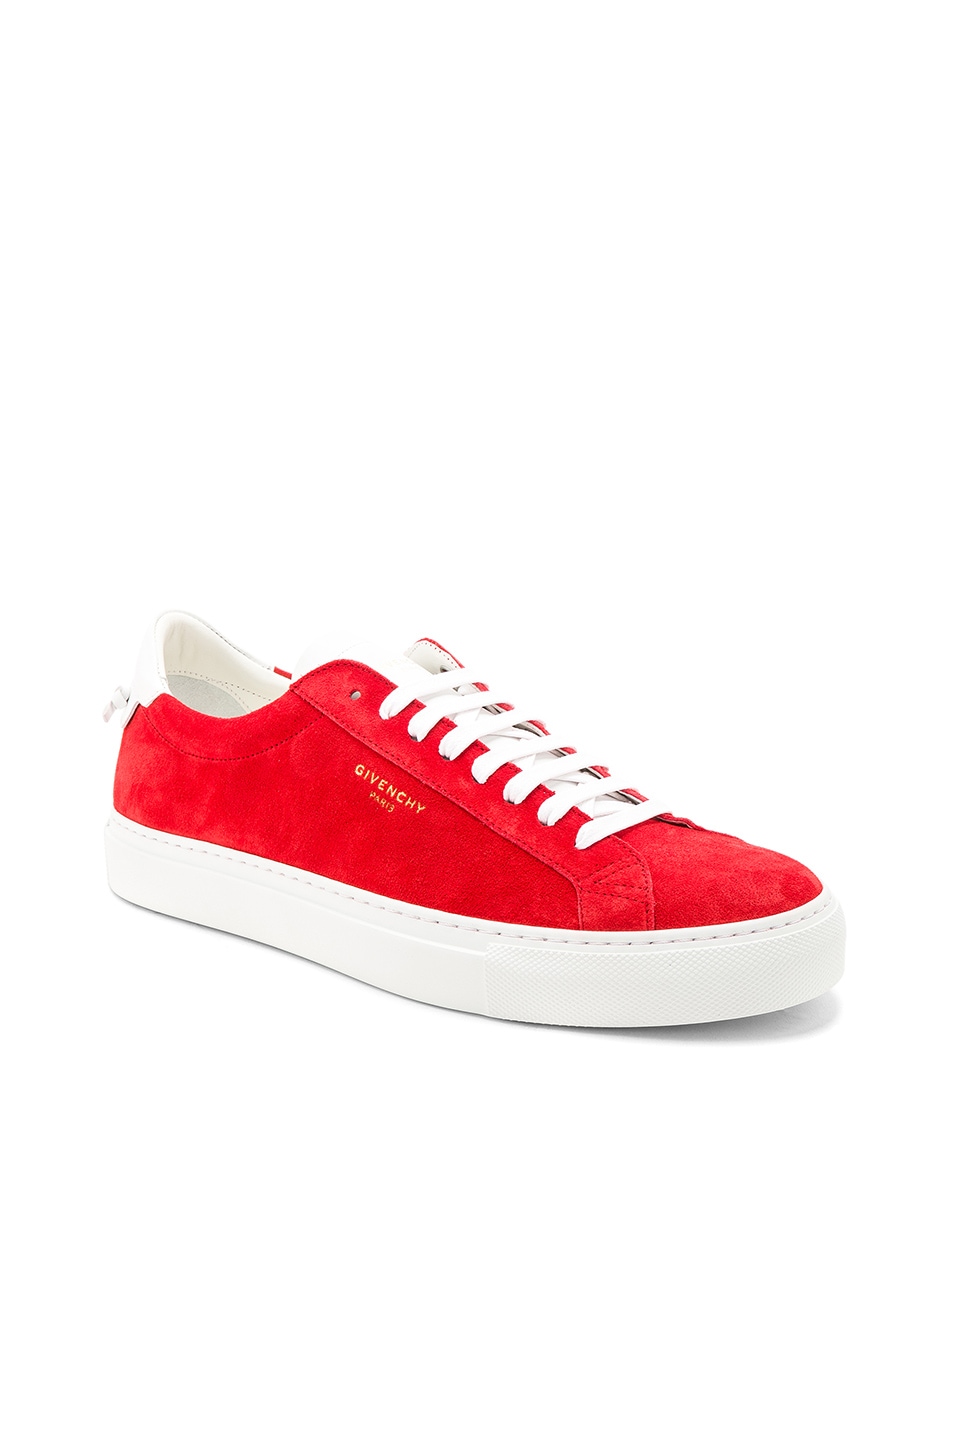 Image 1 of Givenchy Suede Urban Street Low Top Sneakers in Red & White